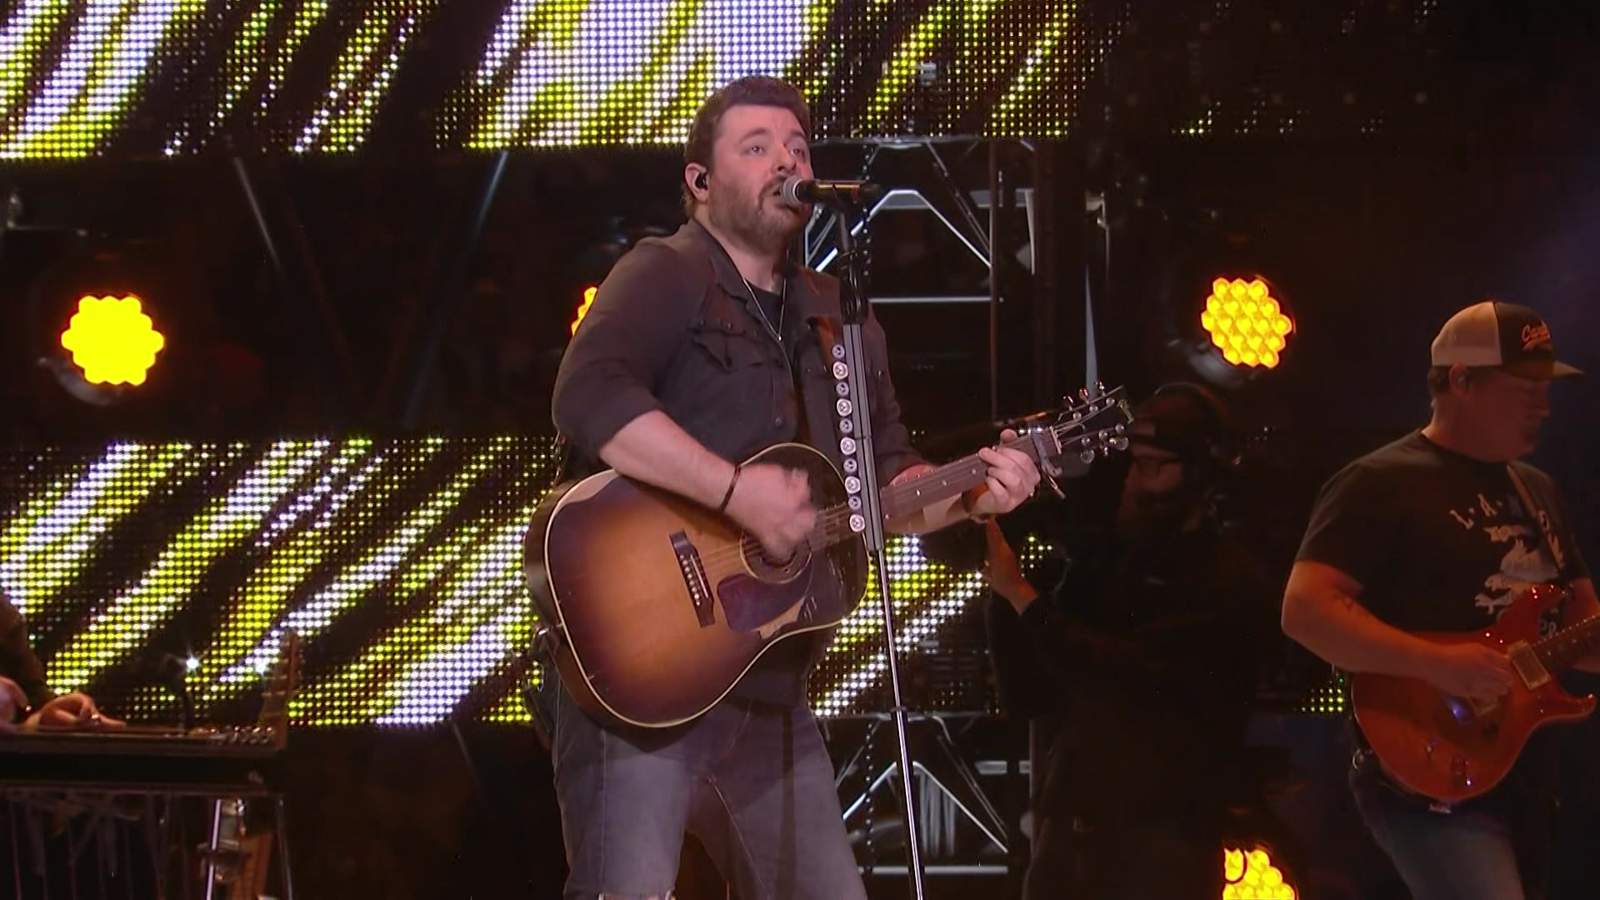 WATCH: Houston Rodeo audience lights up NRG Stadium for Chris Young during emotional performance